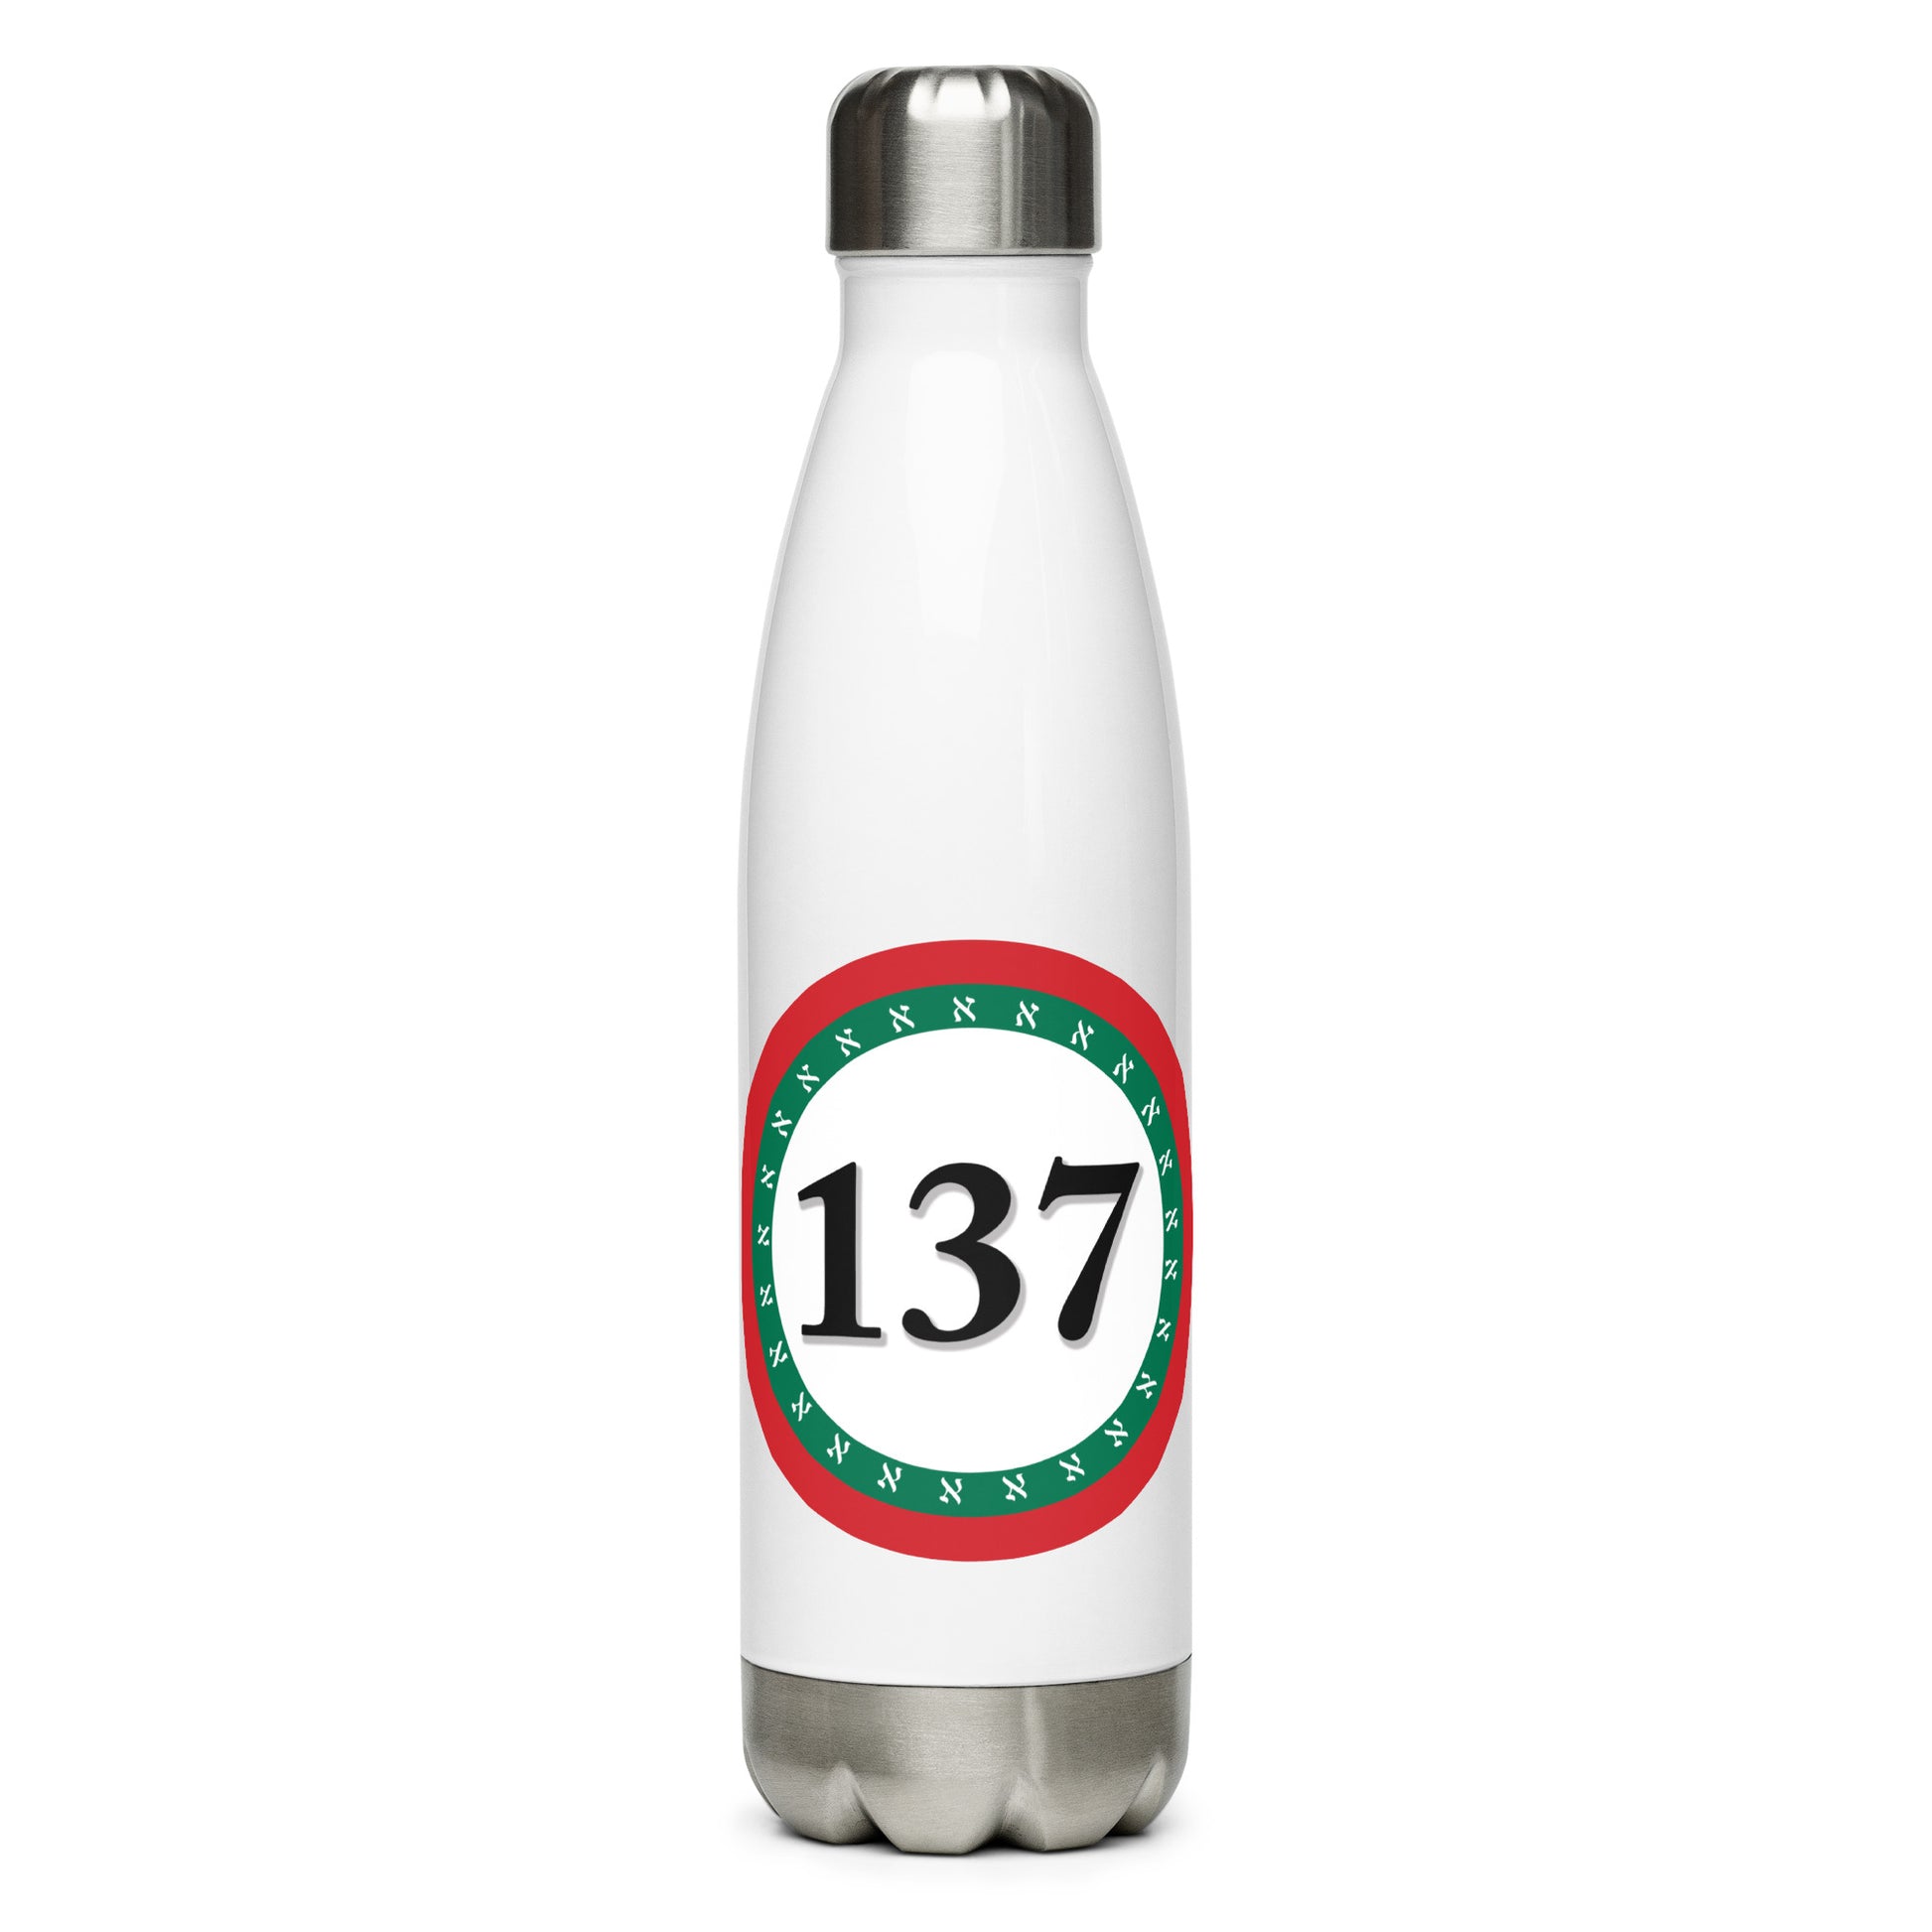  Stainless-Steel-Water-Bottle-17oz-Wht-137 Consciousness-1-137online.com